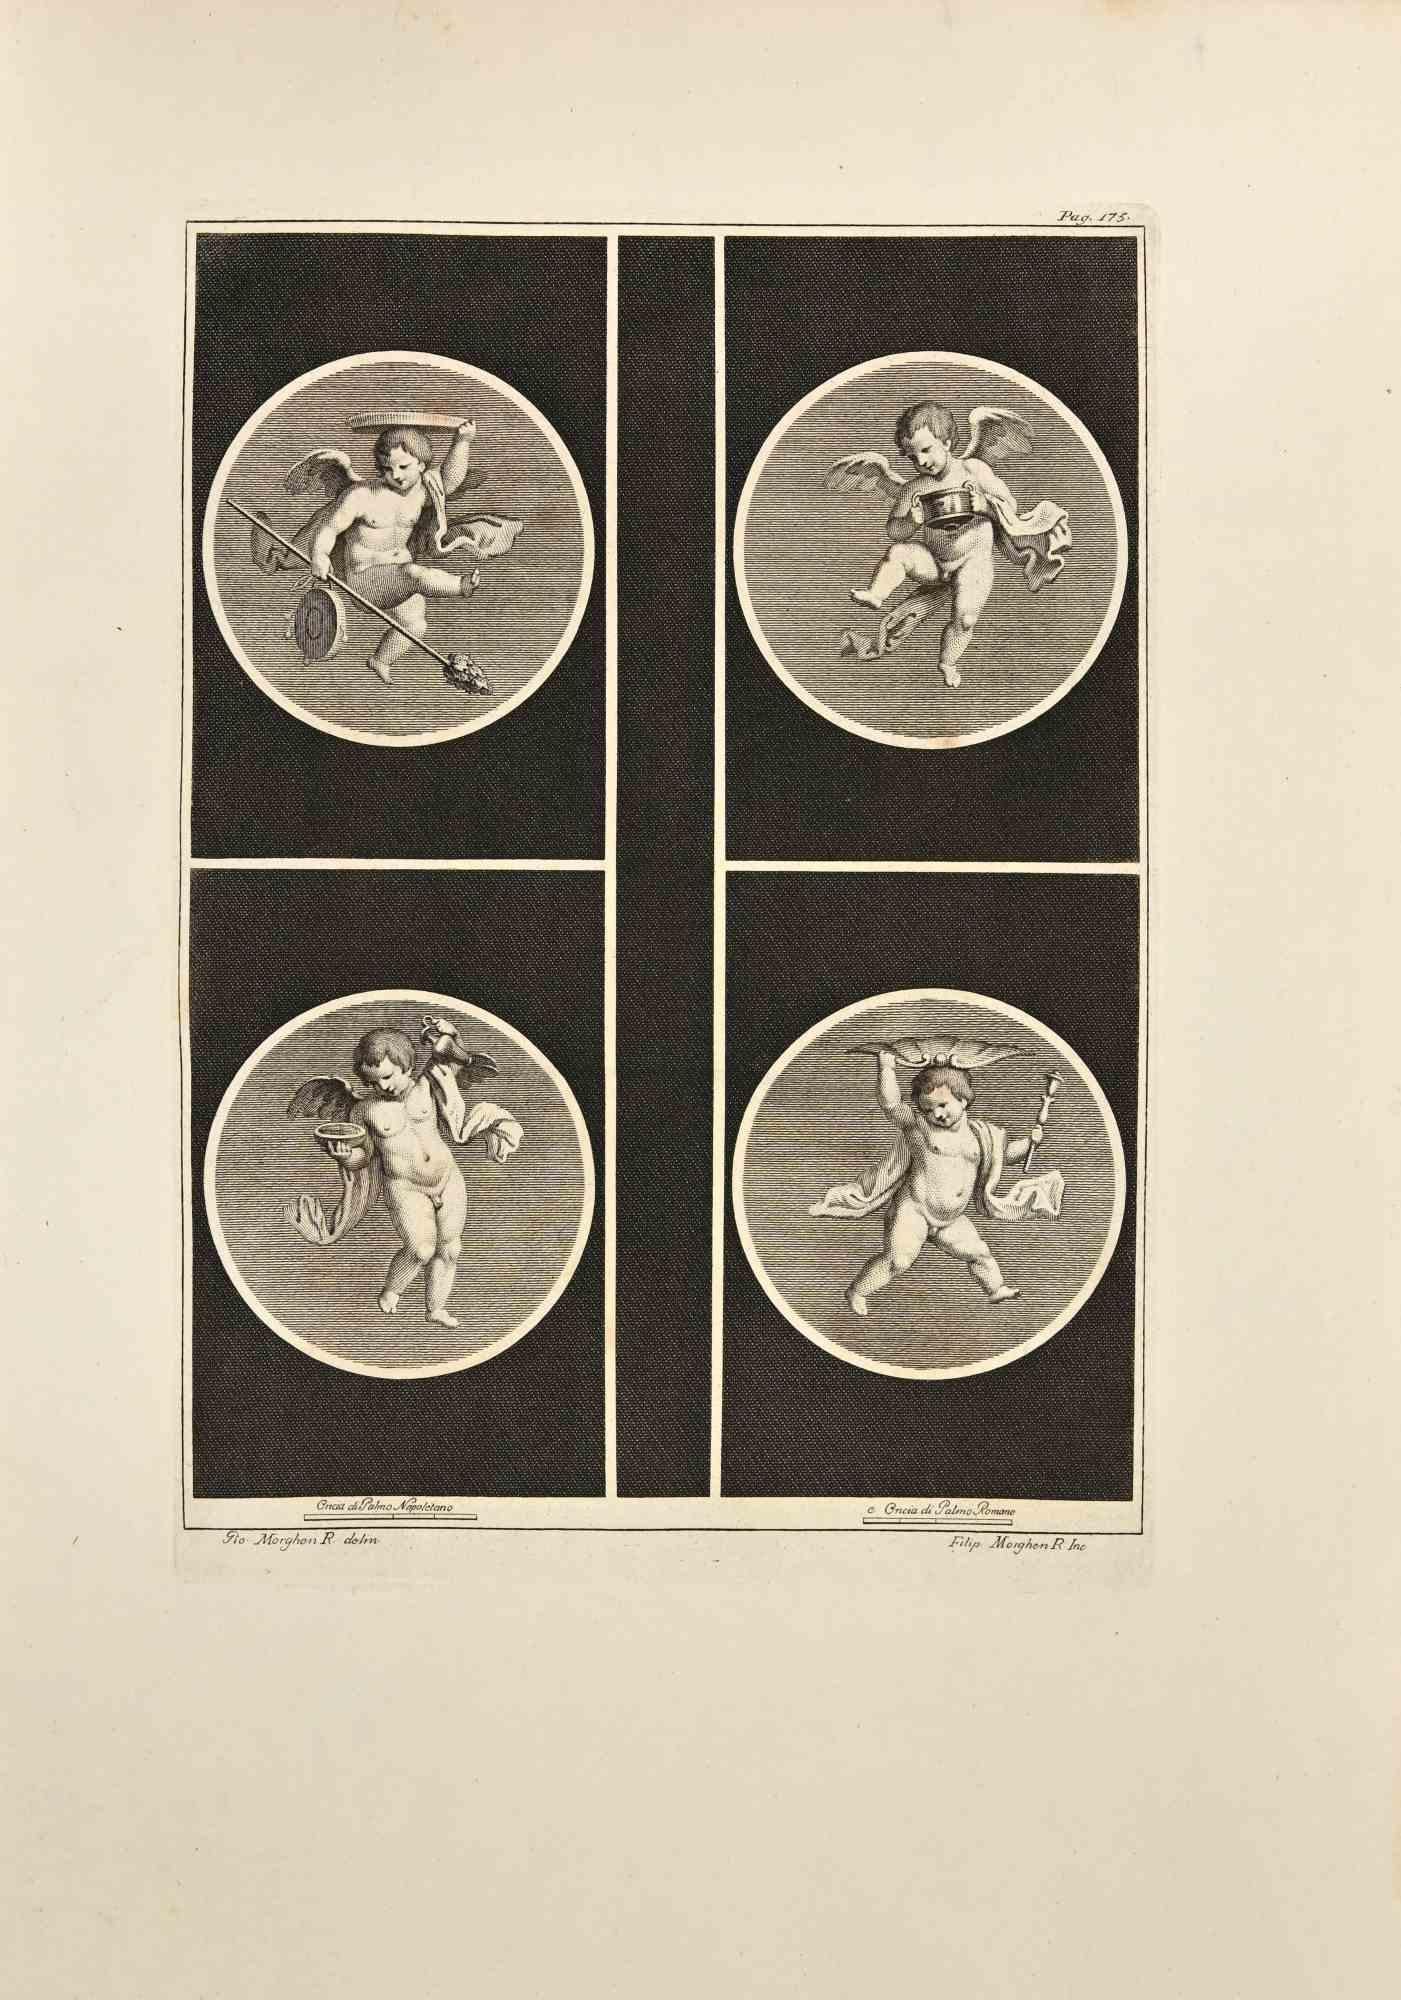 Filippo Morghen Figurative Print - Cupid in Four Seasons  - Etching by Nicola Morghen - 18th Century